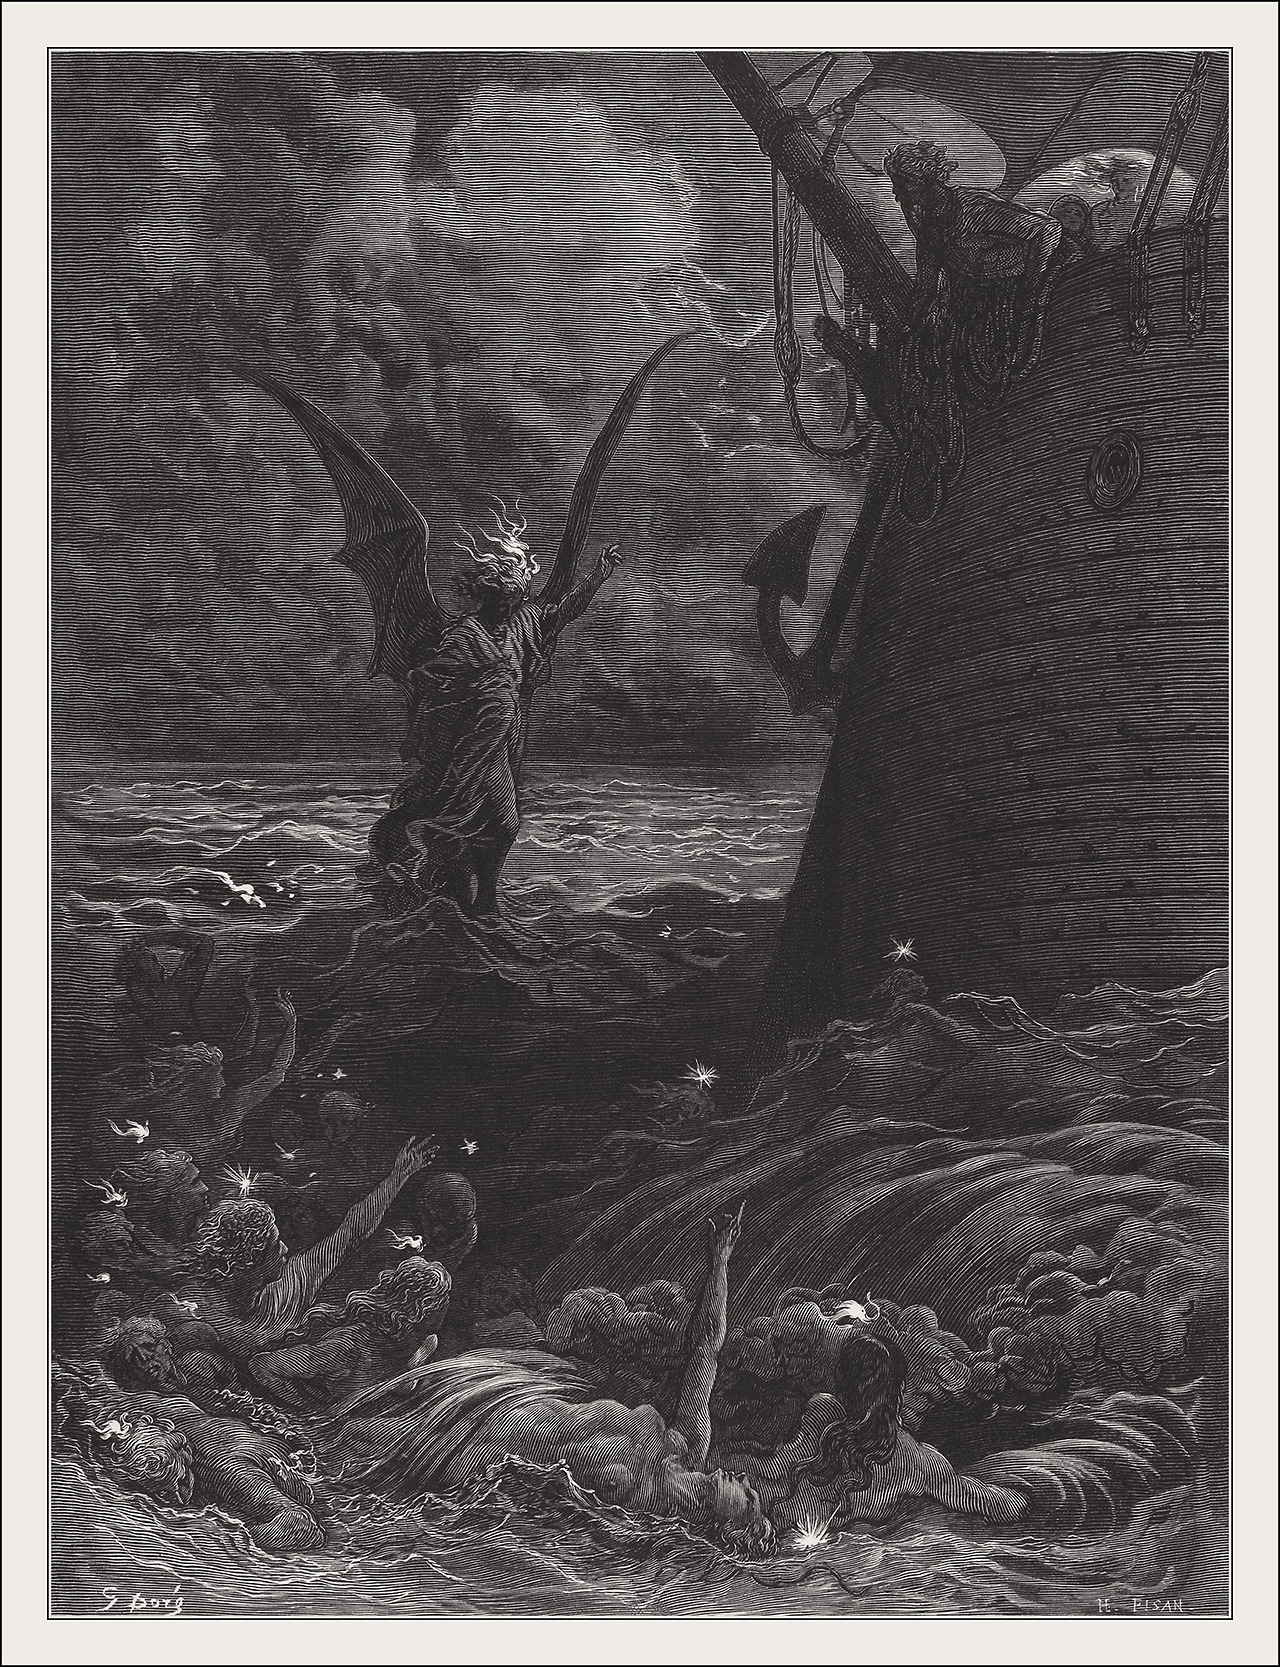 antipahtico:
“ The Rime of the Ancient Mariner ~ Gustave Doré 1876
”